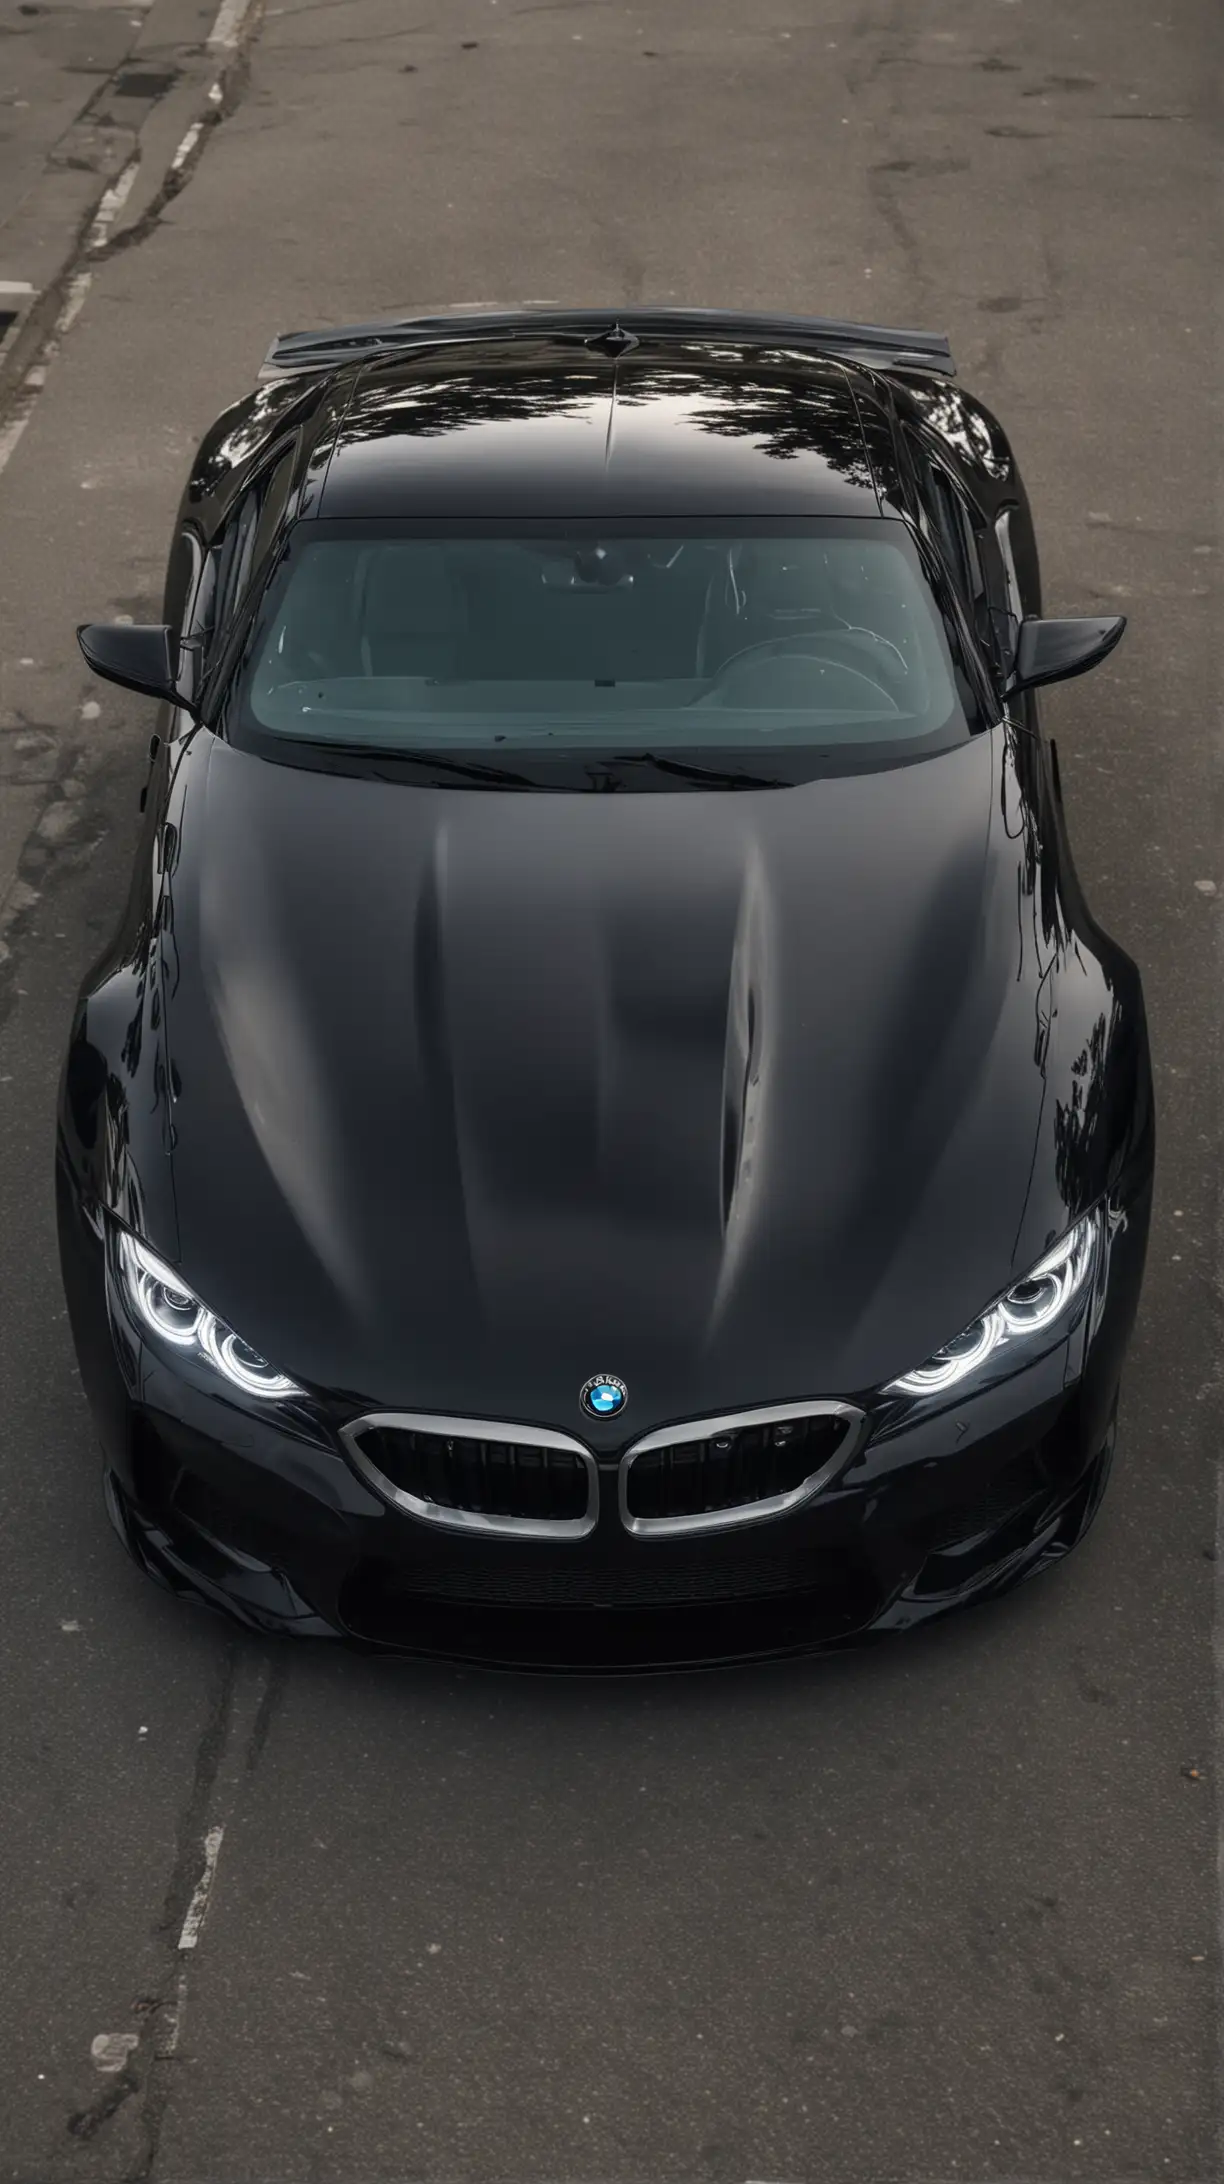 Black BMW super sports car with headlights on, front view